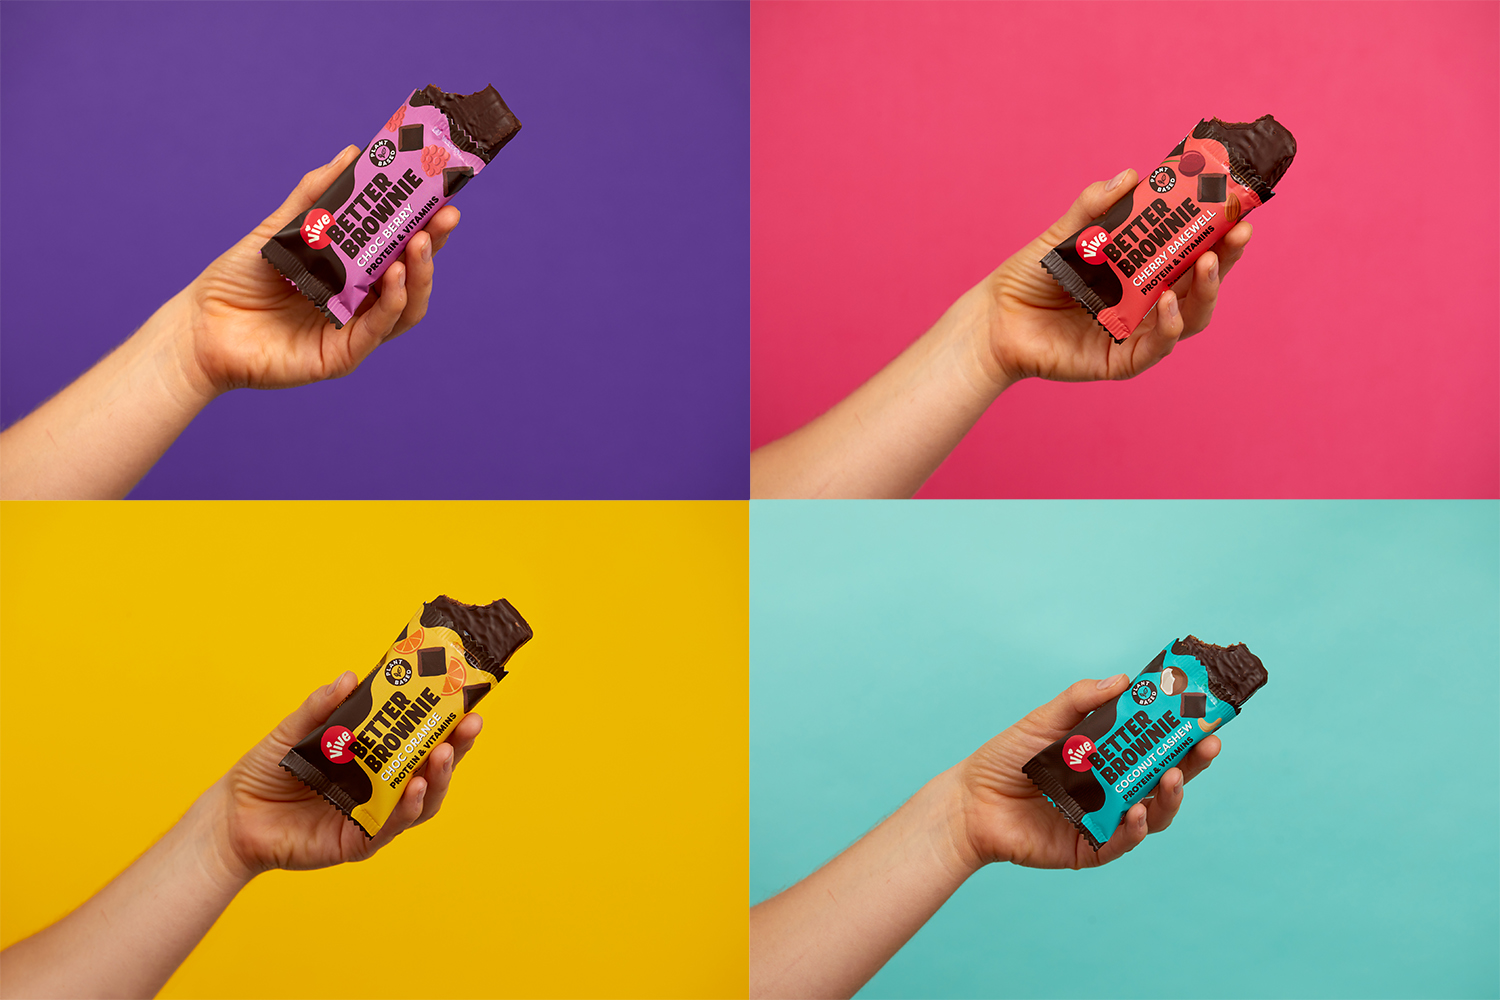 Hunger Craft Creates Packaging Range for Indulgent but Wholesome Snacks Vive